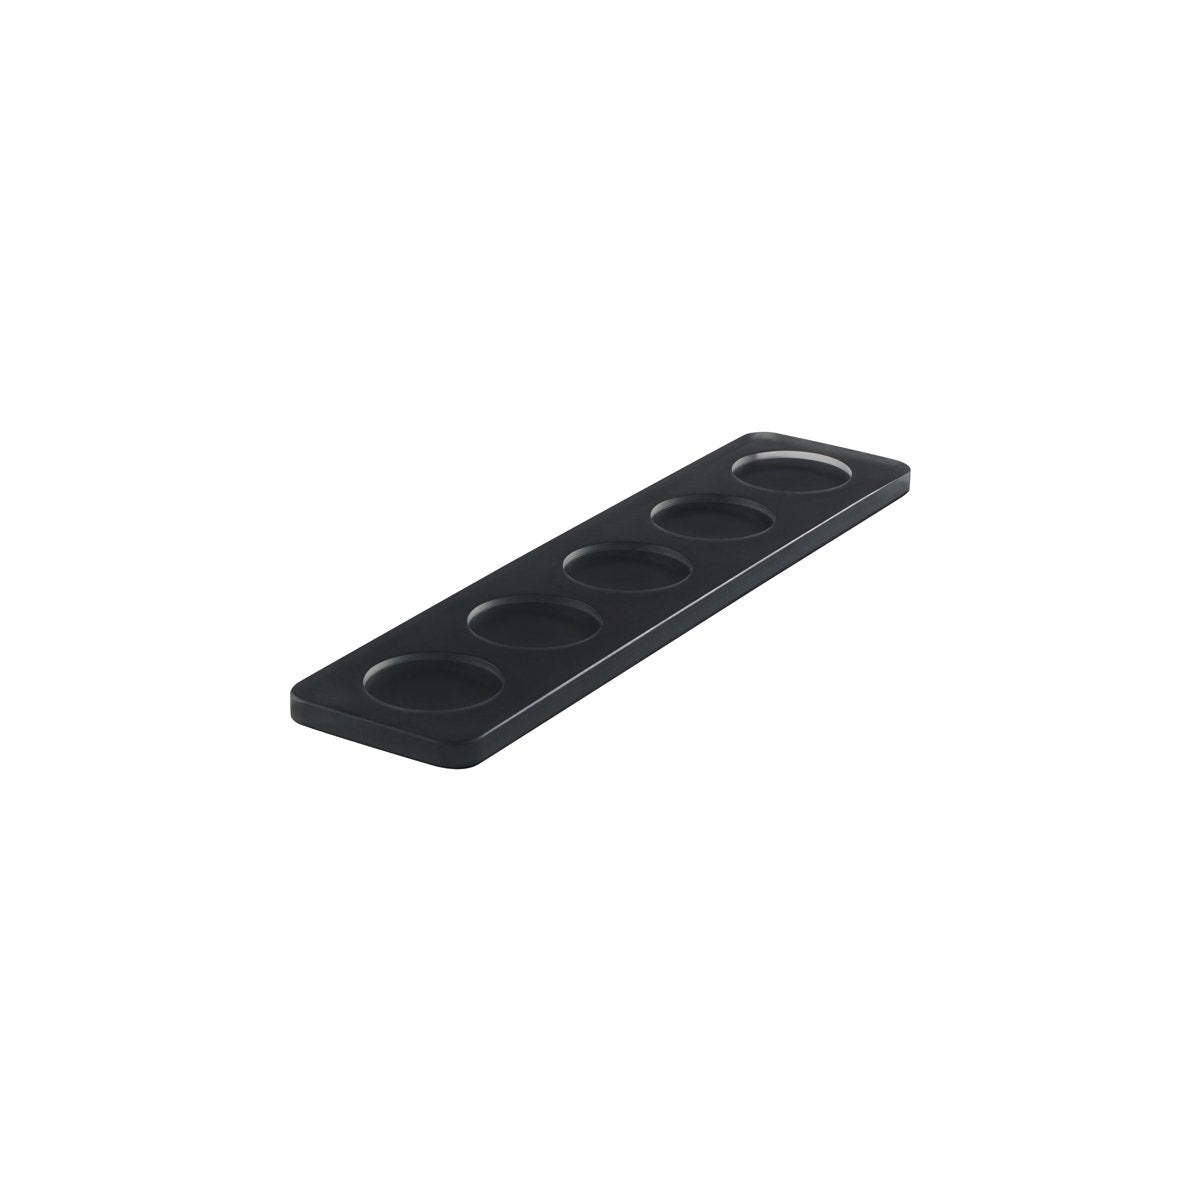 MLP118964 Mealplak Tray With 5 Indents Anthracite 295x70x10mm Tomkin Australia Hospitality Supplies